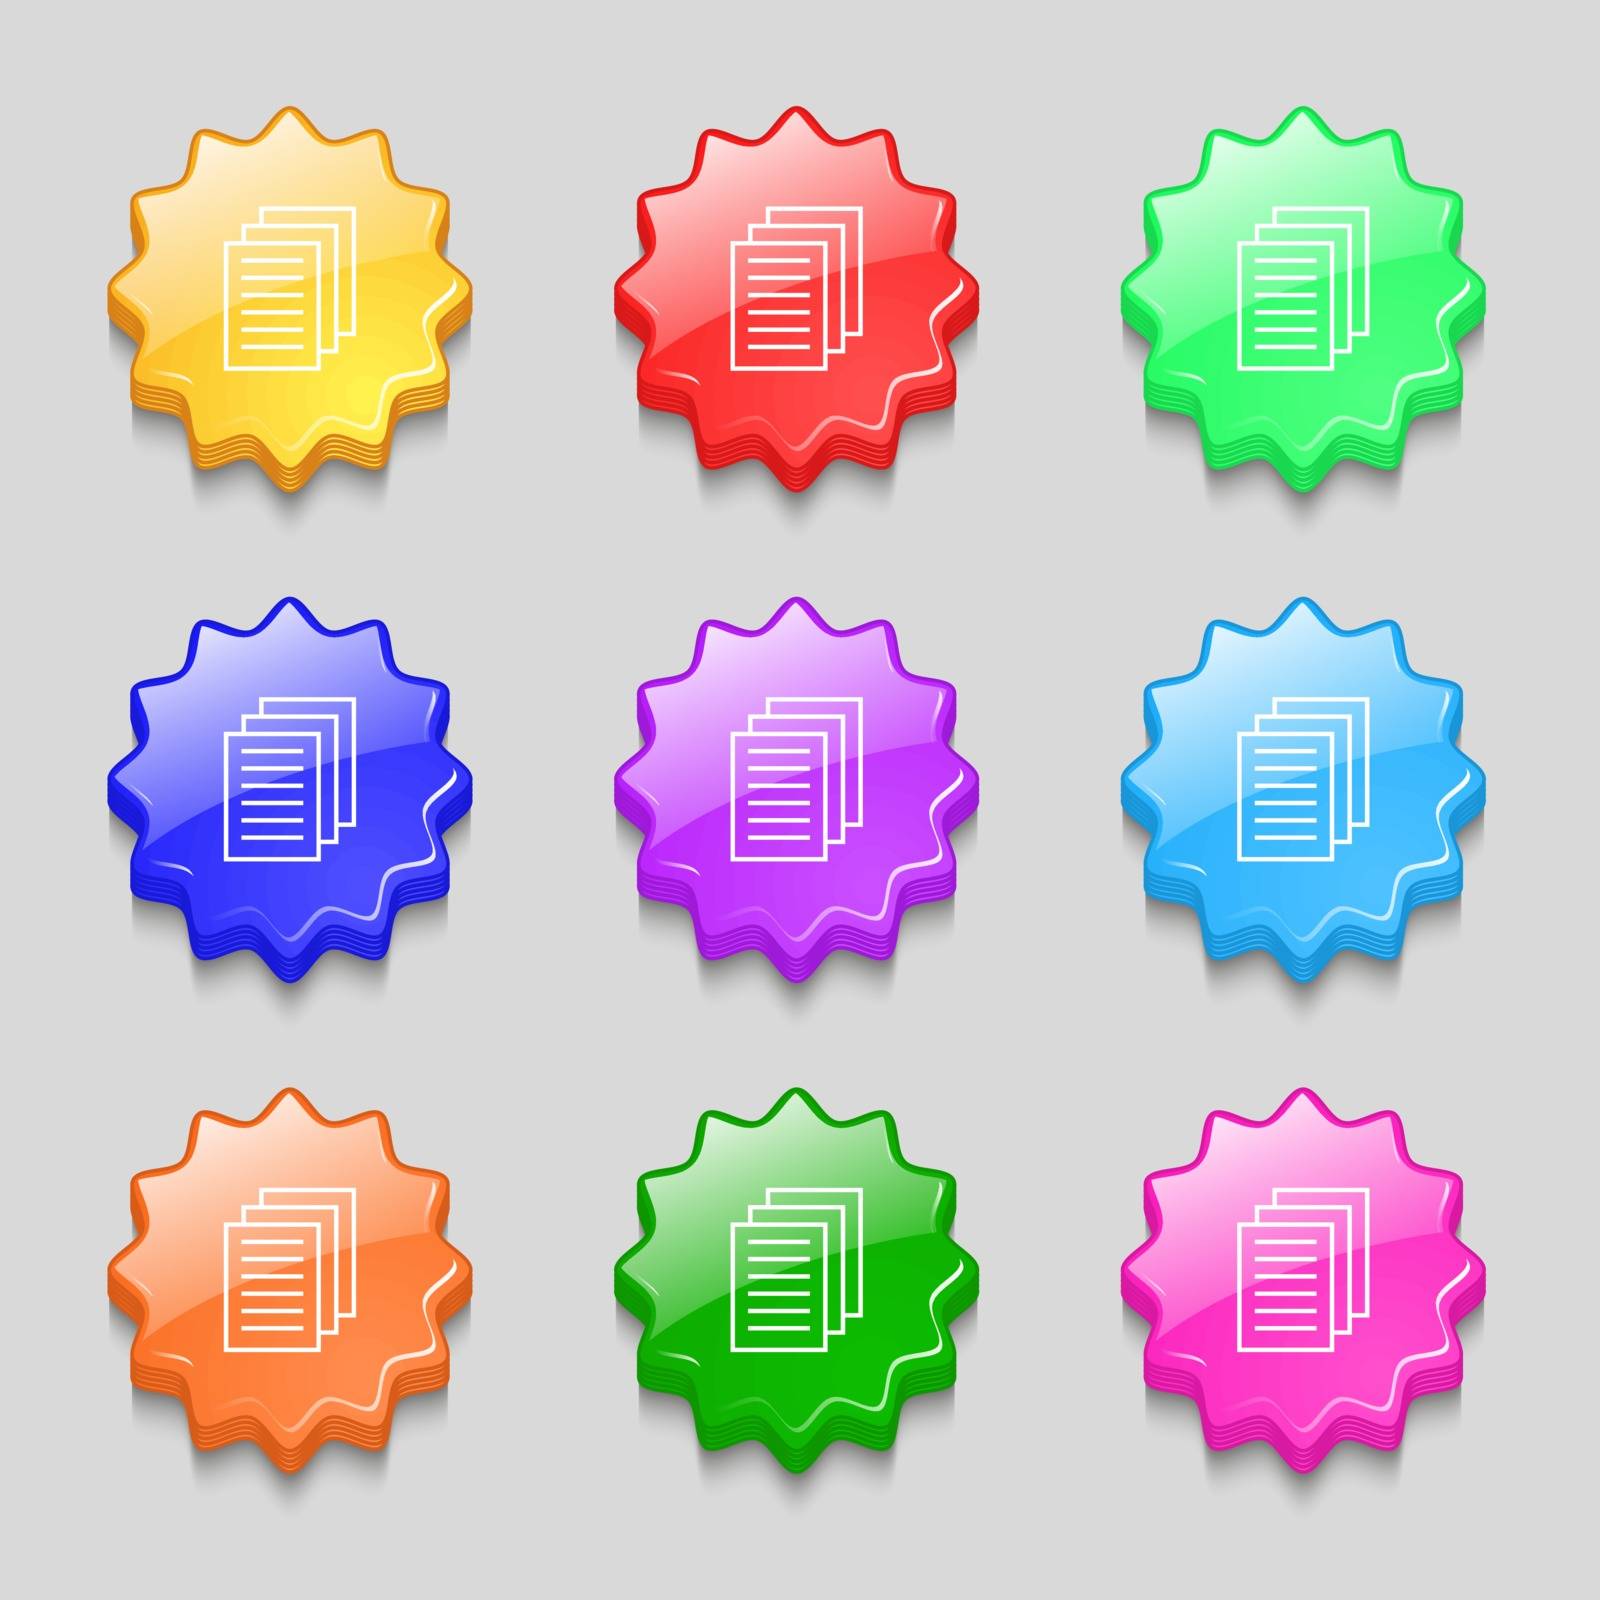 Copy file sign icon. Duplicate document symbol. Symbols on nine wavy colourful buttons. Vector illustration